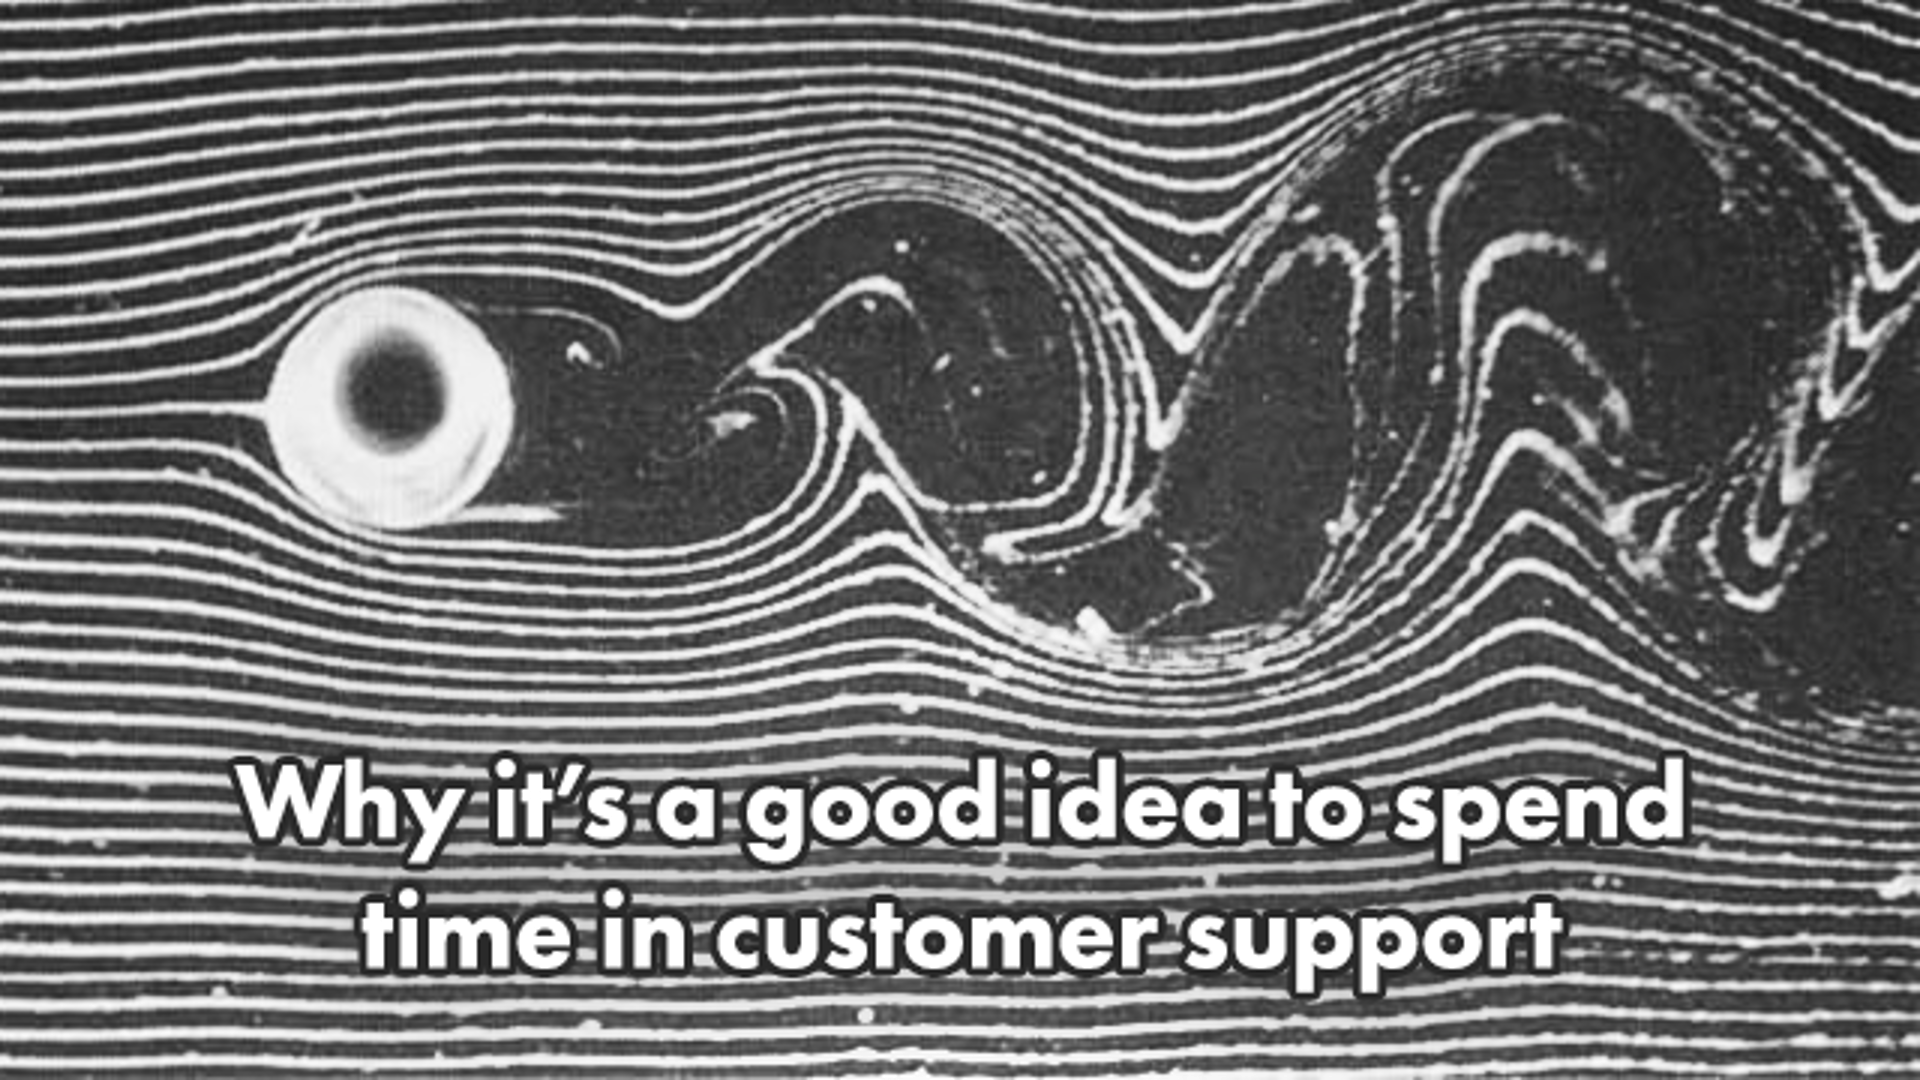 Spending Time with Customer Support